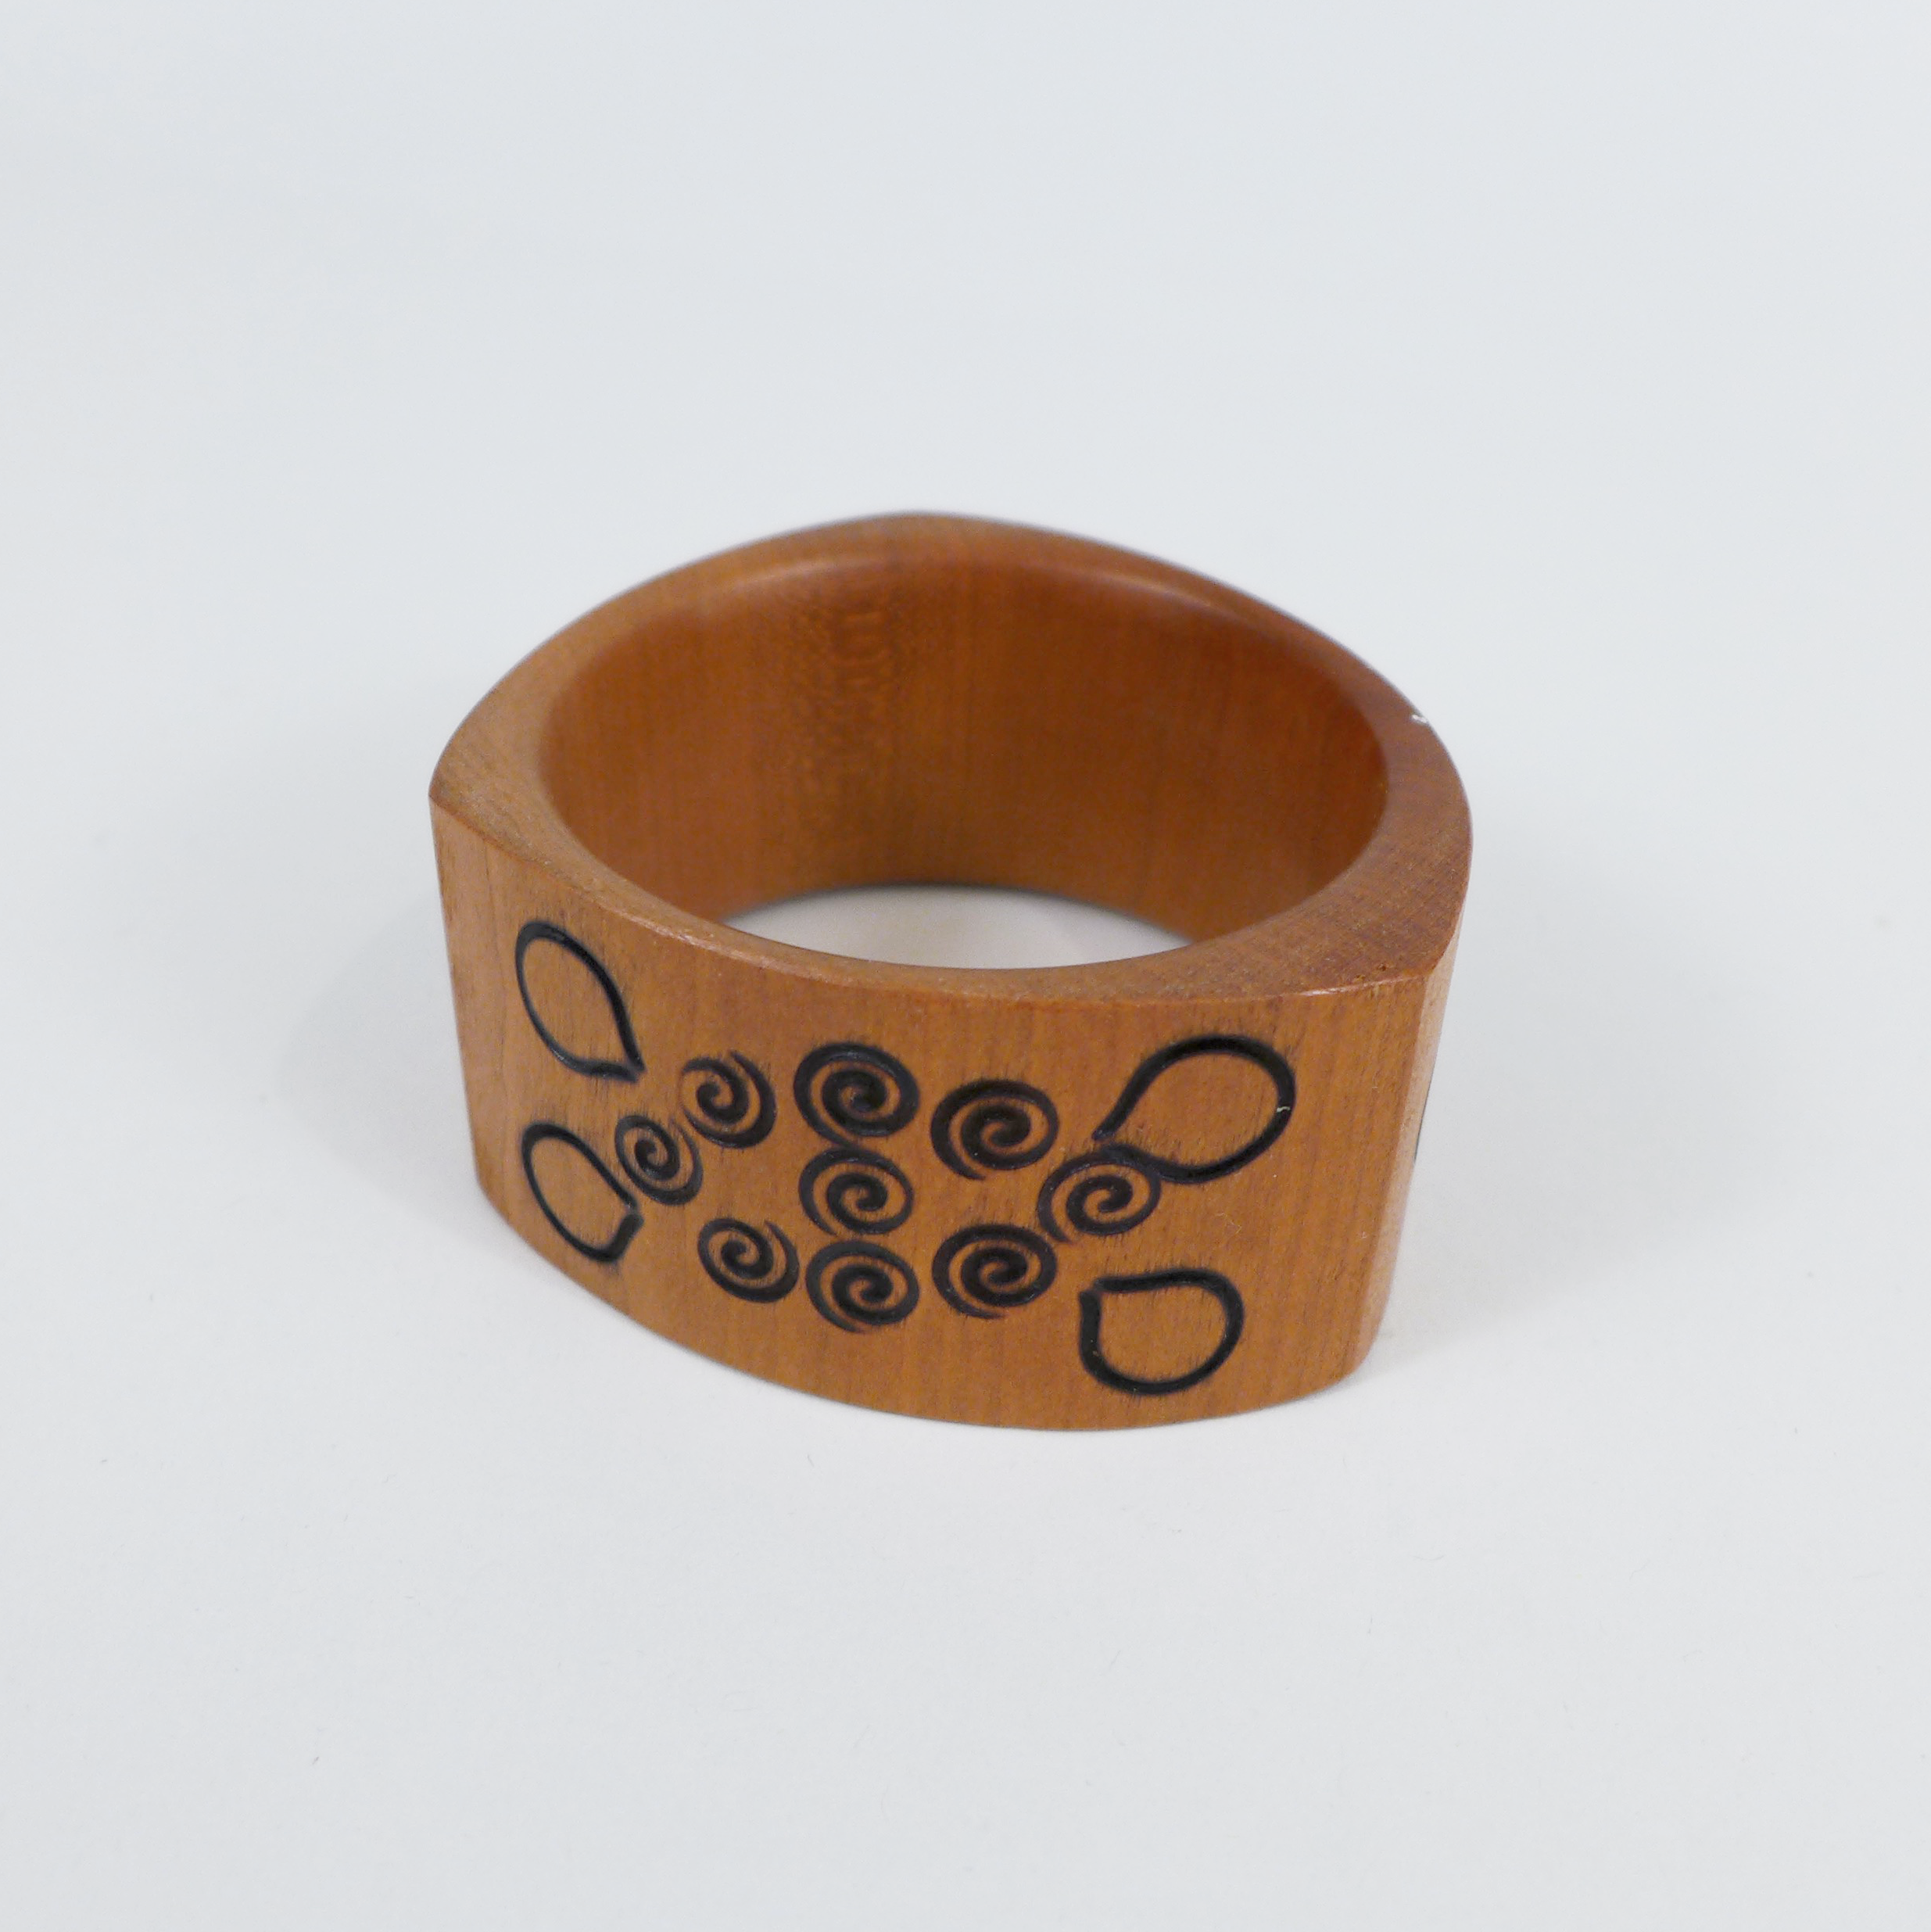 Wood Bangle Bracelet, one of a kind, hand-turned wood jewelry by Philip Hauser at the Center for Art in Wood